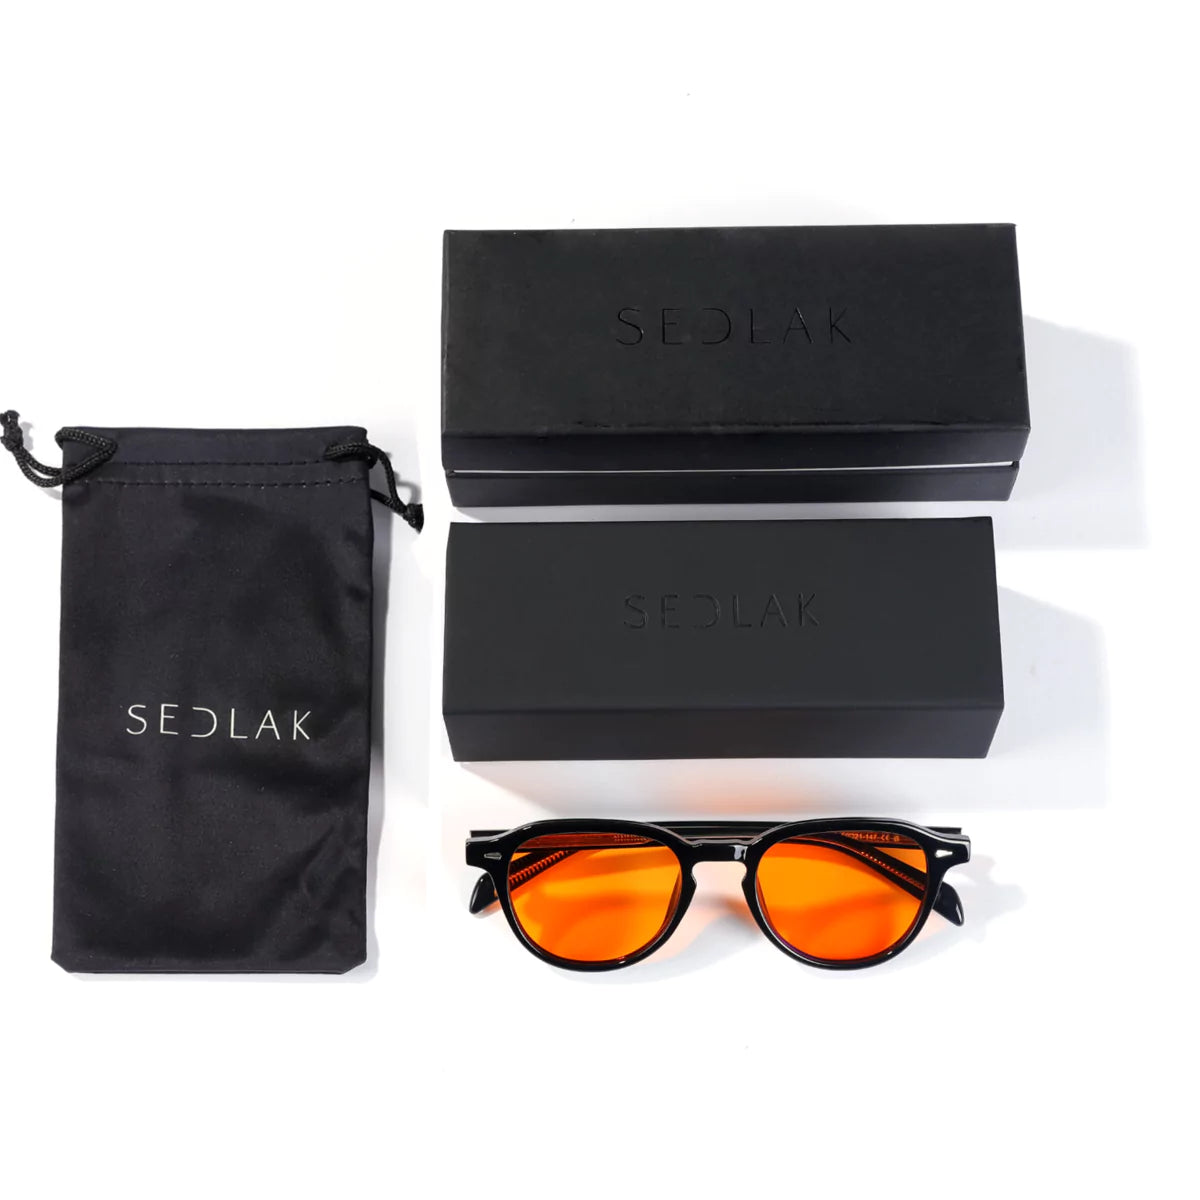 Sunglasses with orange lenses next to two black boxes and a pouch with 'SEDLAK' branding.